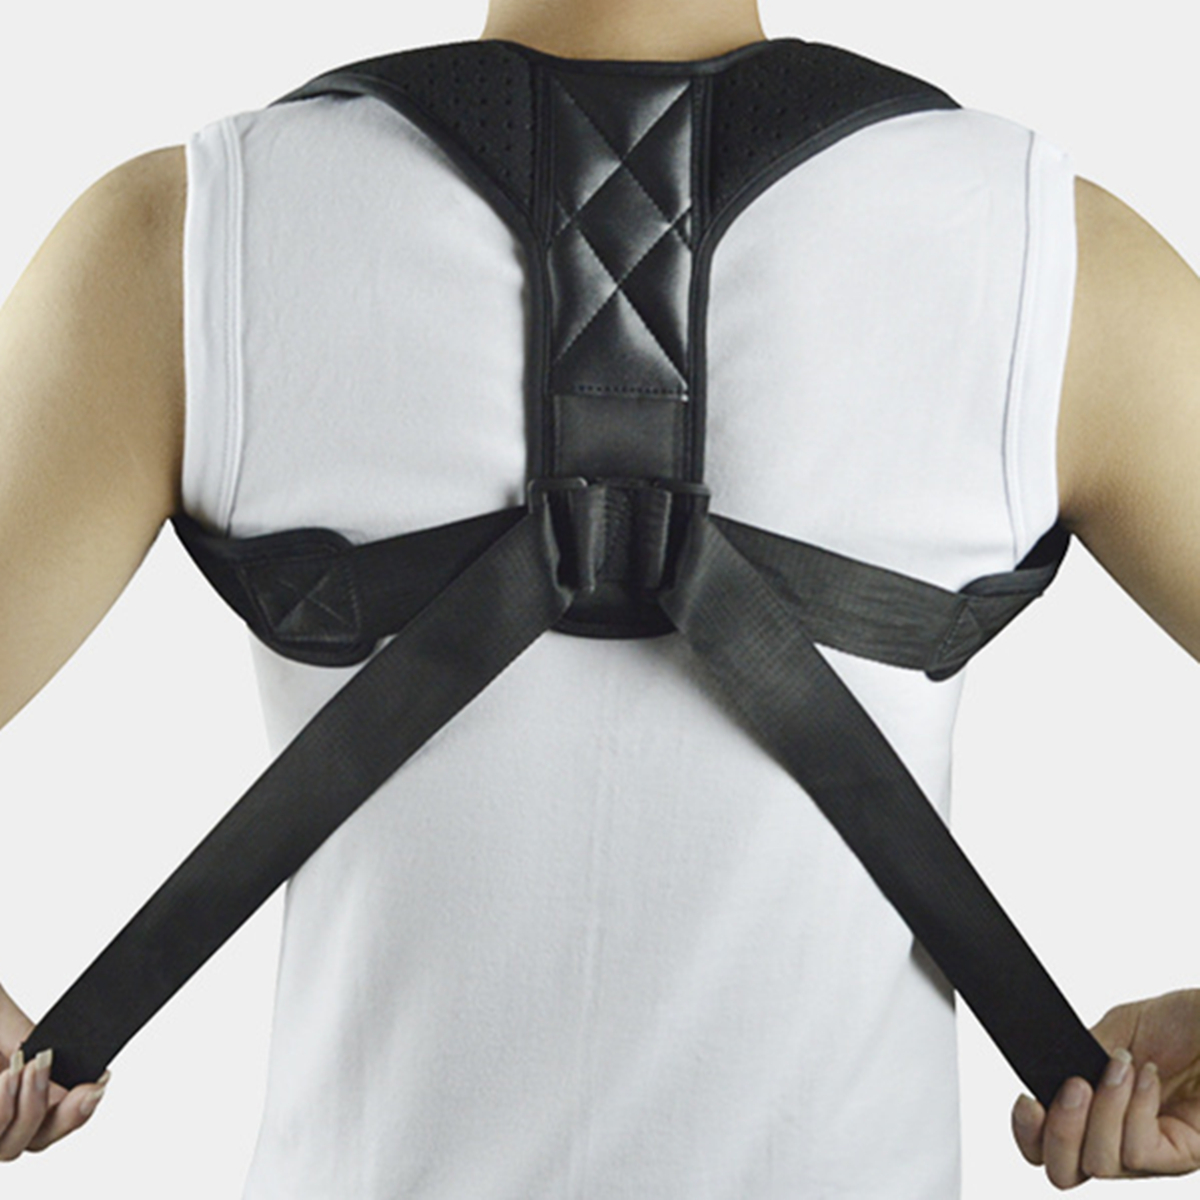 Adjustable-Posture-Corrector-Brace-for-Men-and-Women-Clavicle-Support-Brace-to-Straighten-Upper-Back-1418230